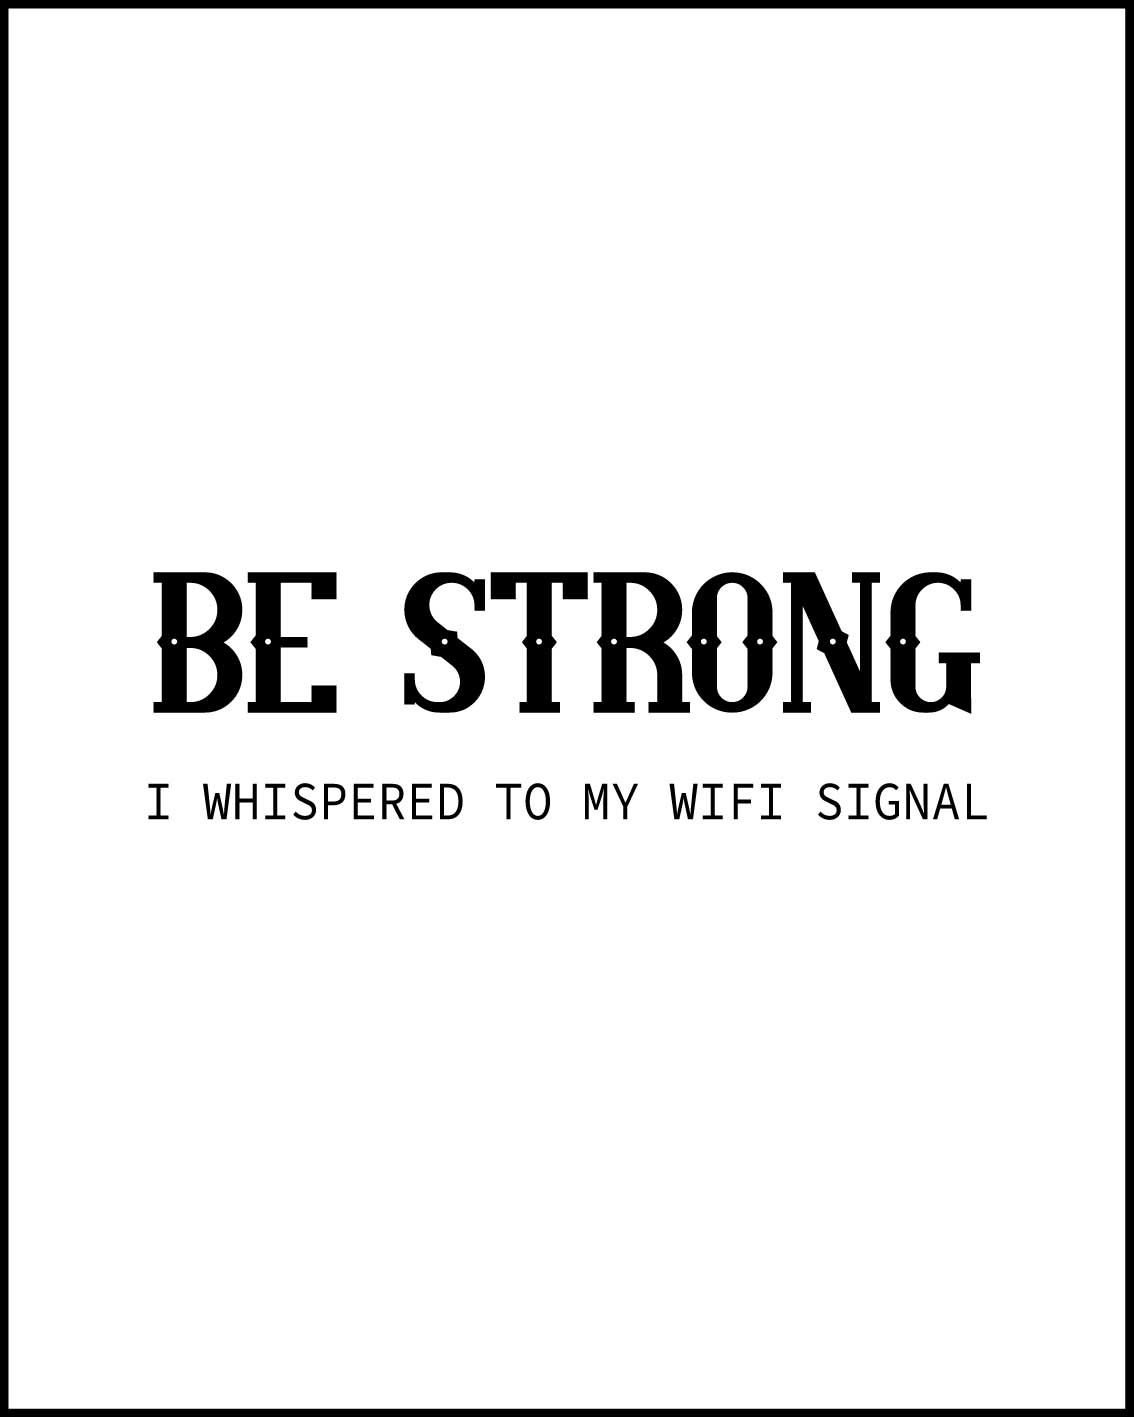 Be Strong Poster